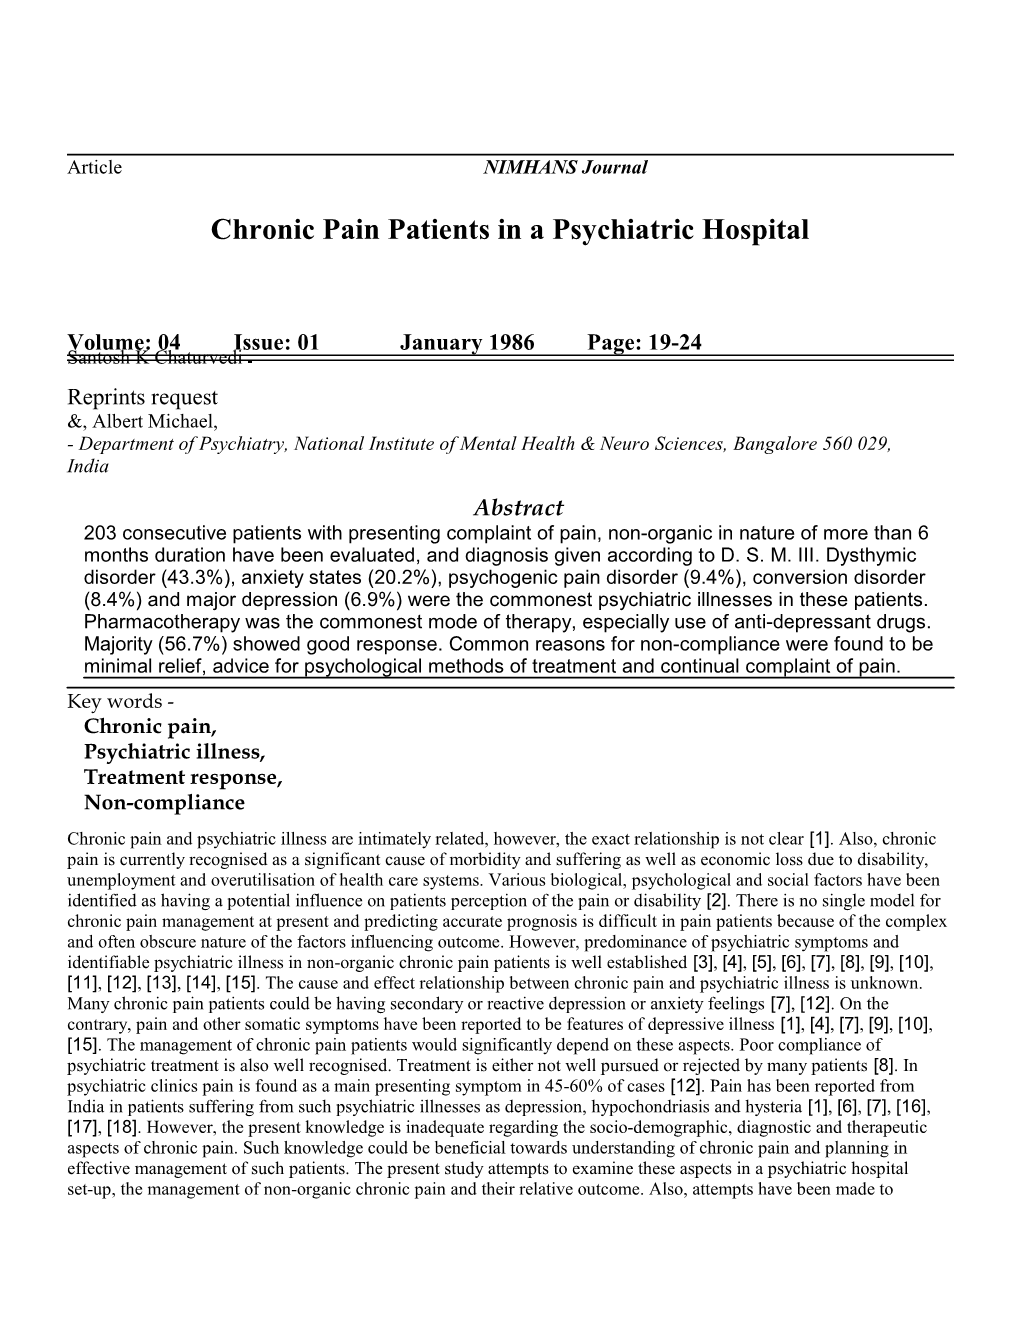 Chronic Pain Patients in a Psychiatric Hospital